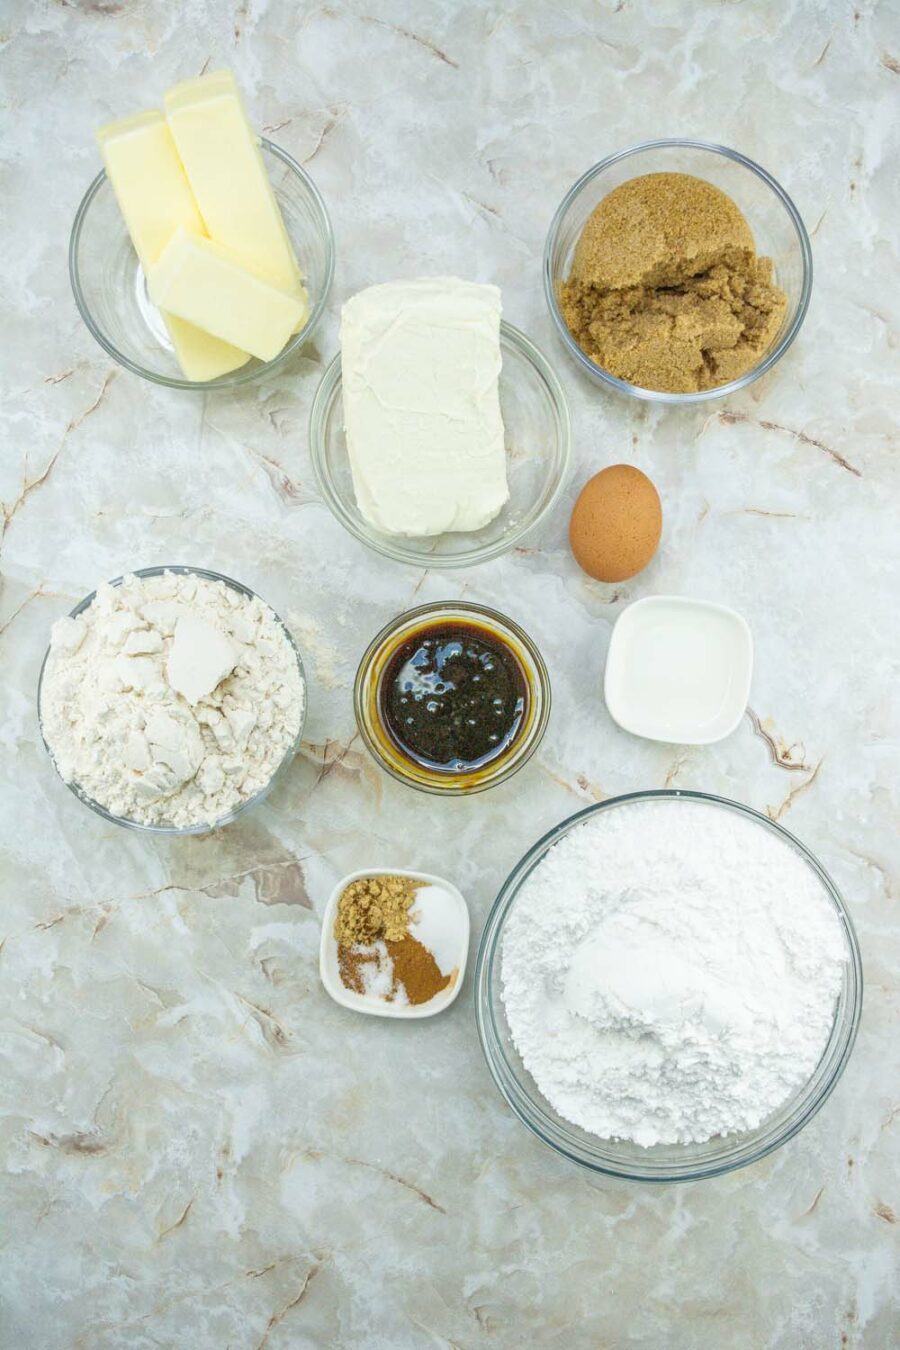 Soft gingersnap cookies and cream cheese frosting ingredients